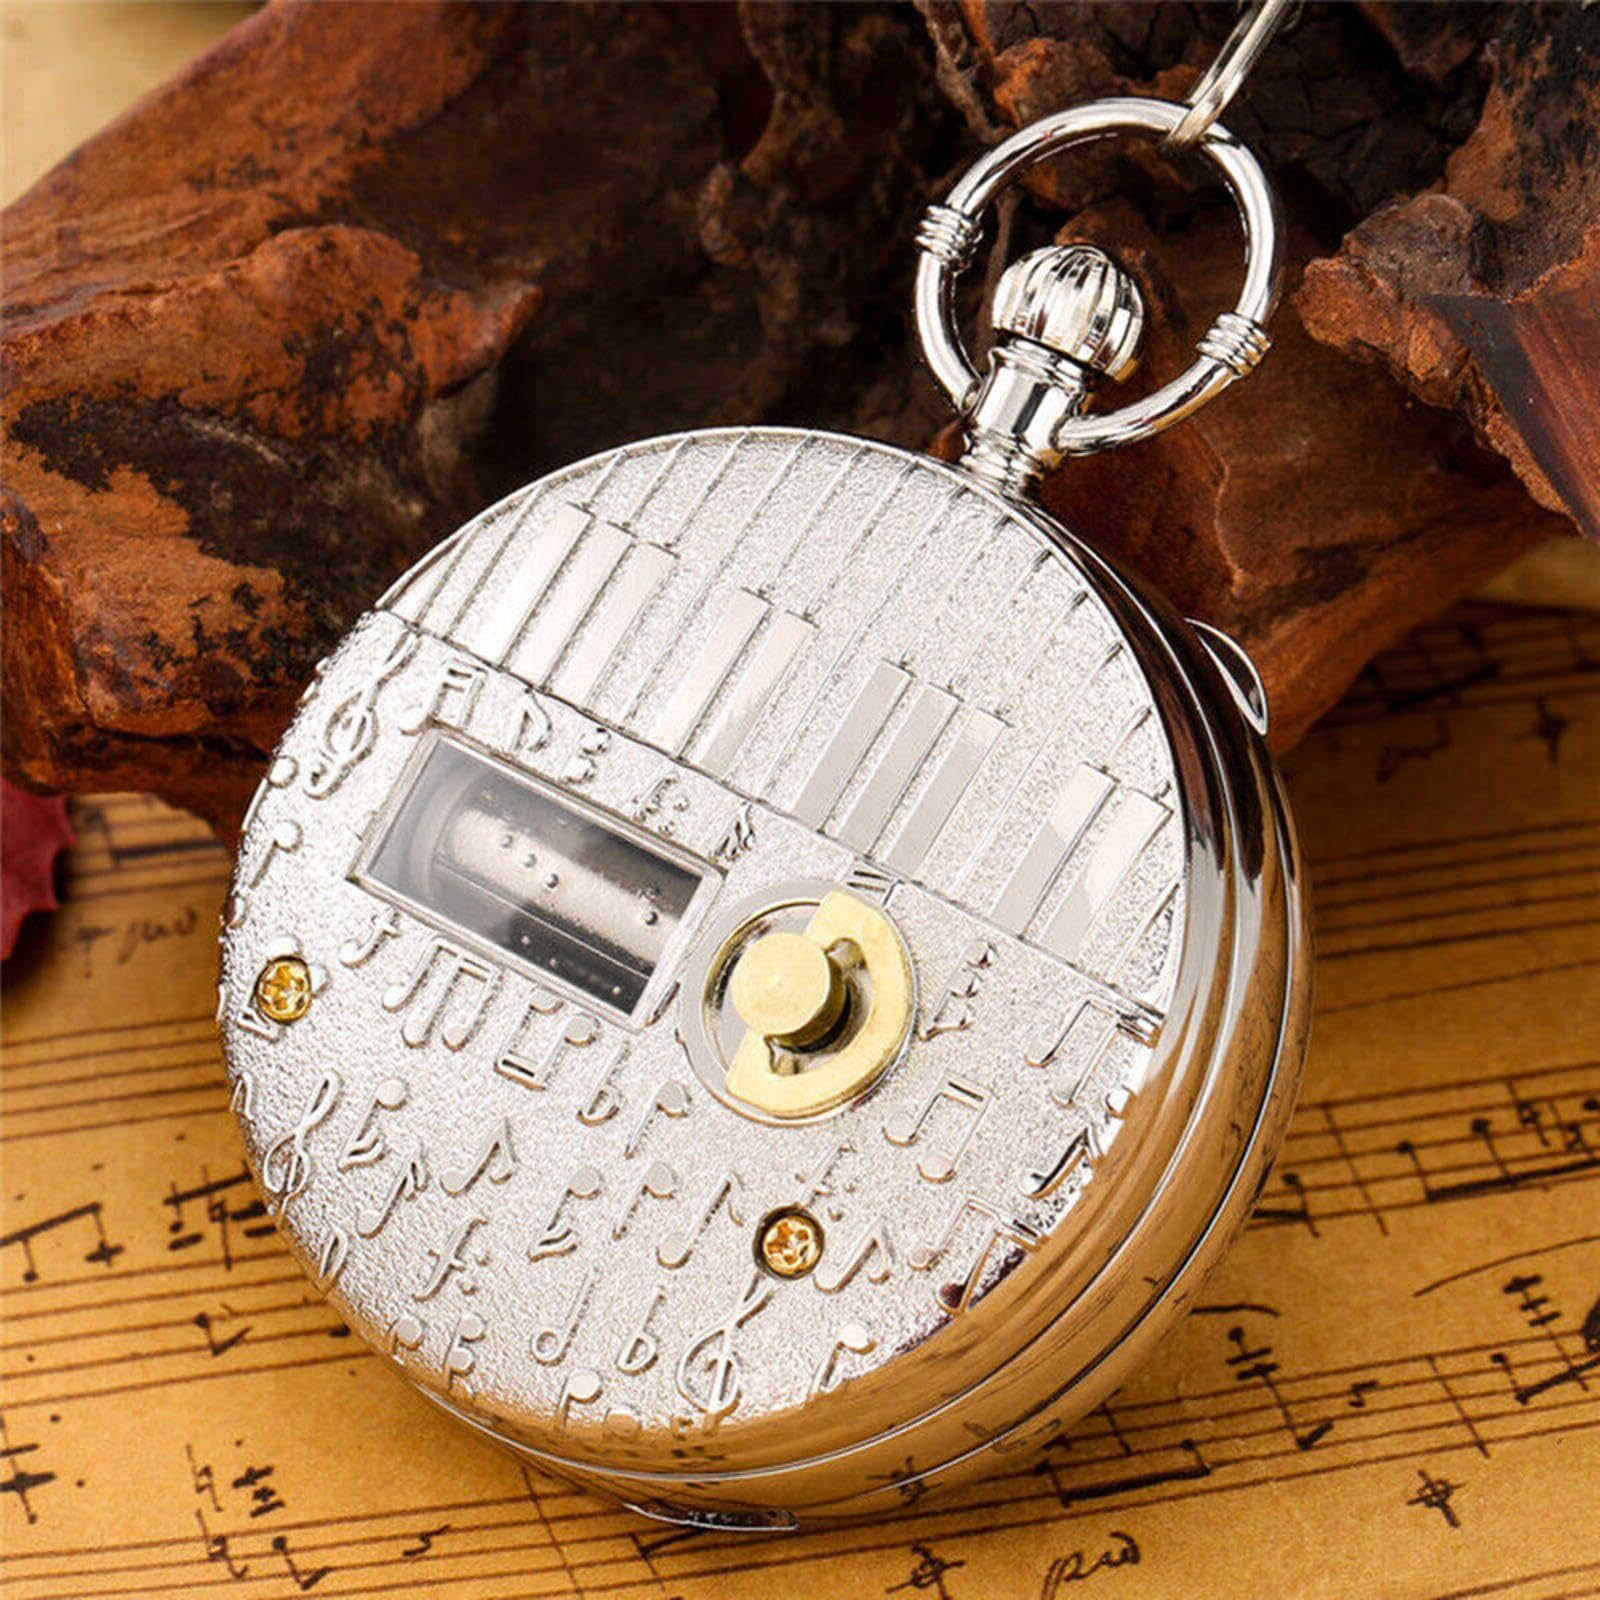 MOOKEENONE Pocket Watch with Music Box, Musical Movement Pocket Watch with Chain, Railroad Train Design Shell